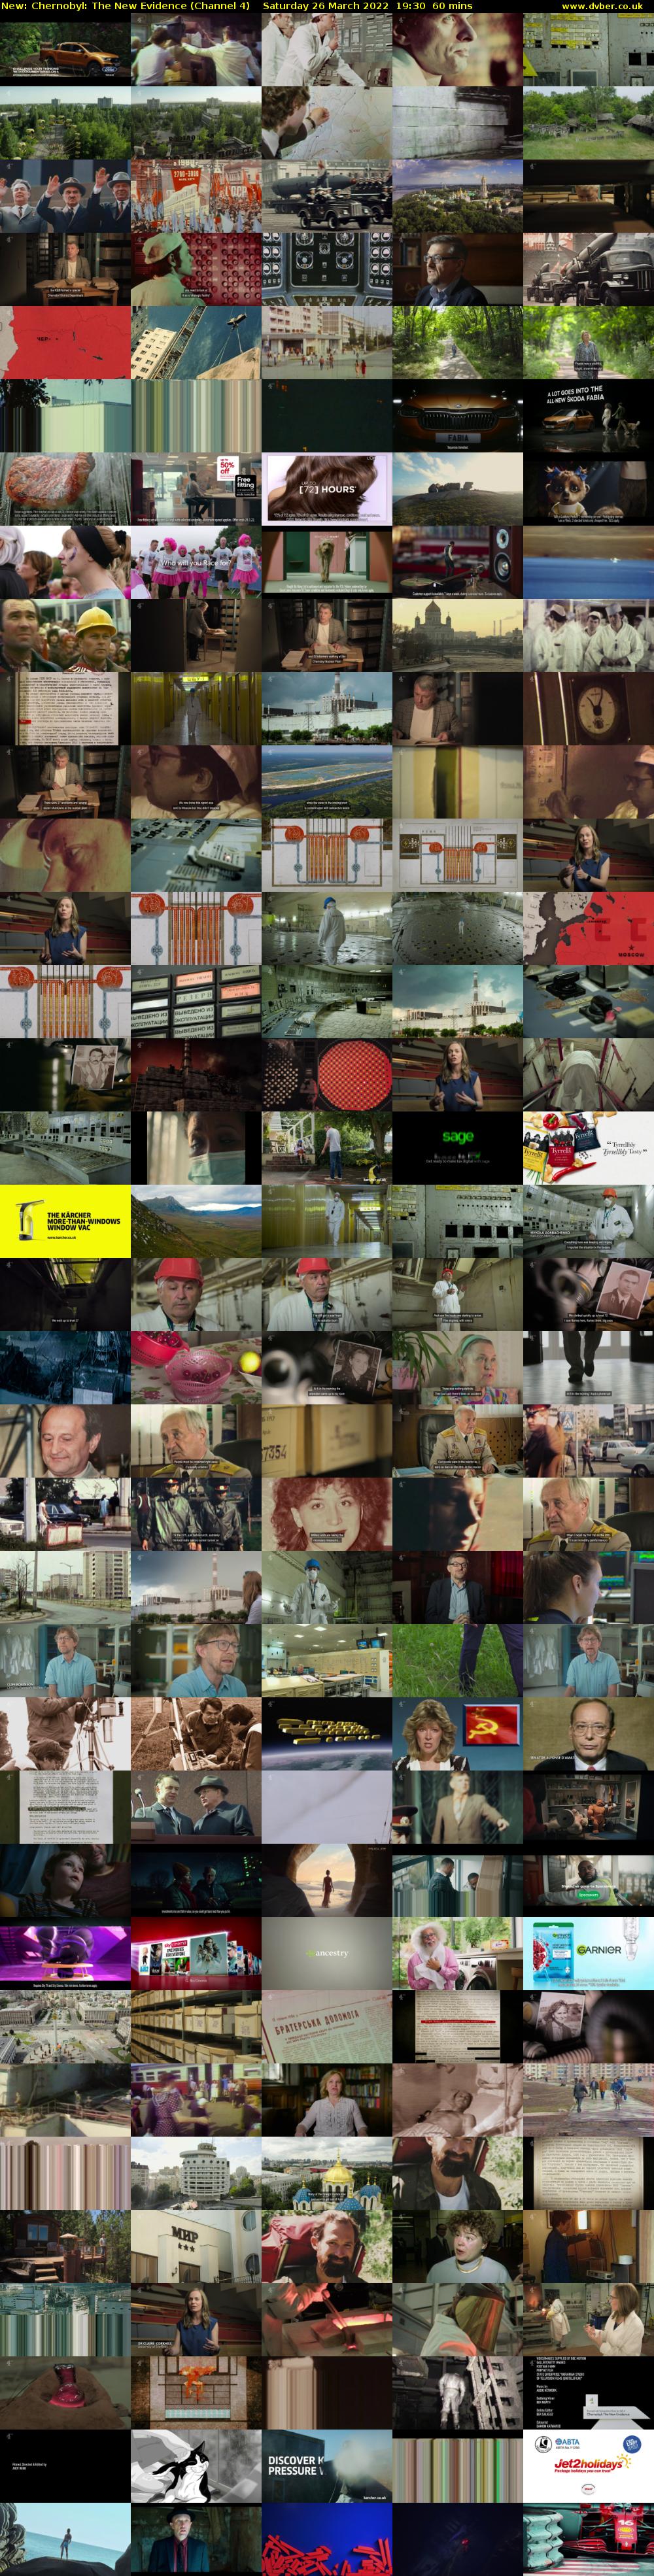 Chernobyl: The New Evidence (Channel 4) Saturday 26 March 2022 19:30 - 20:30